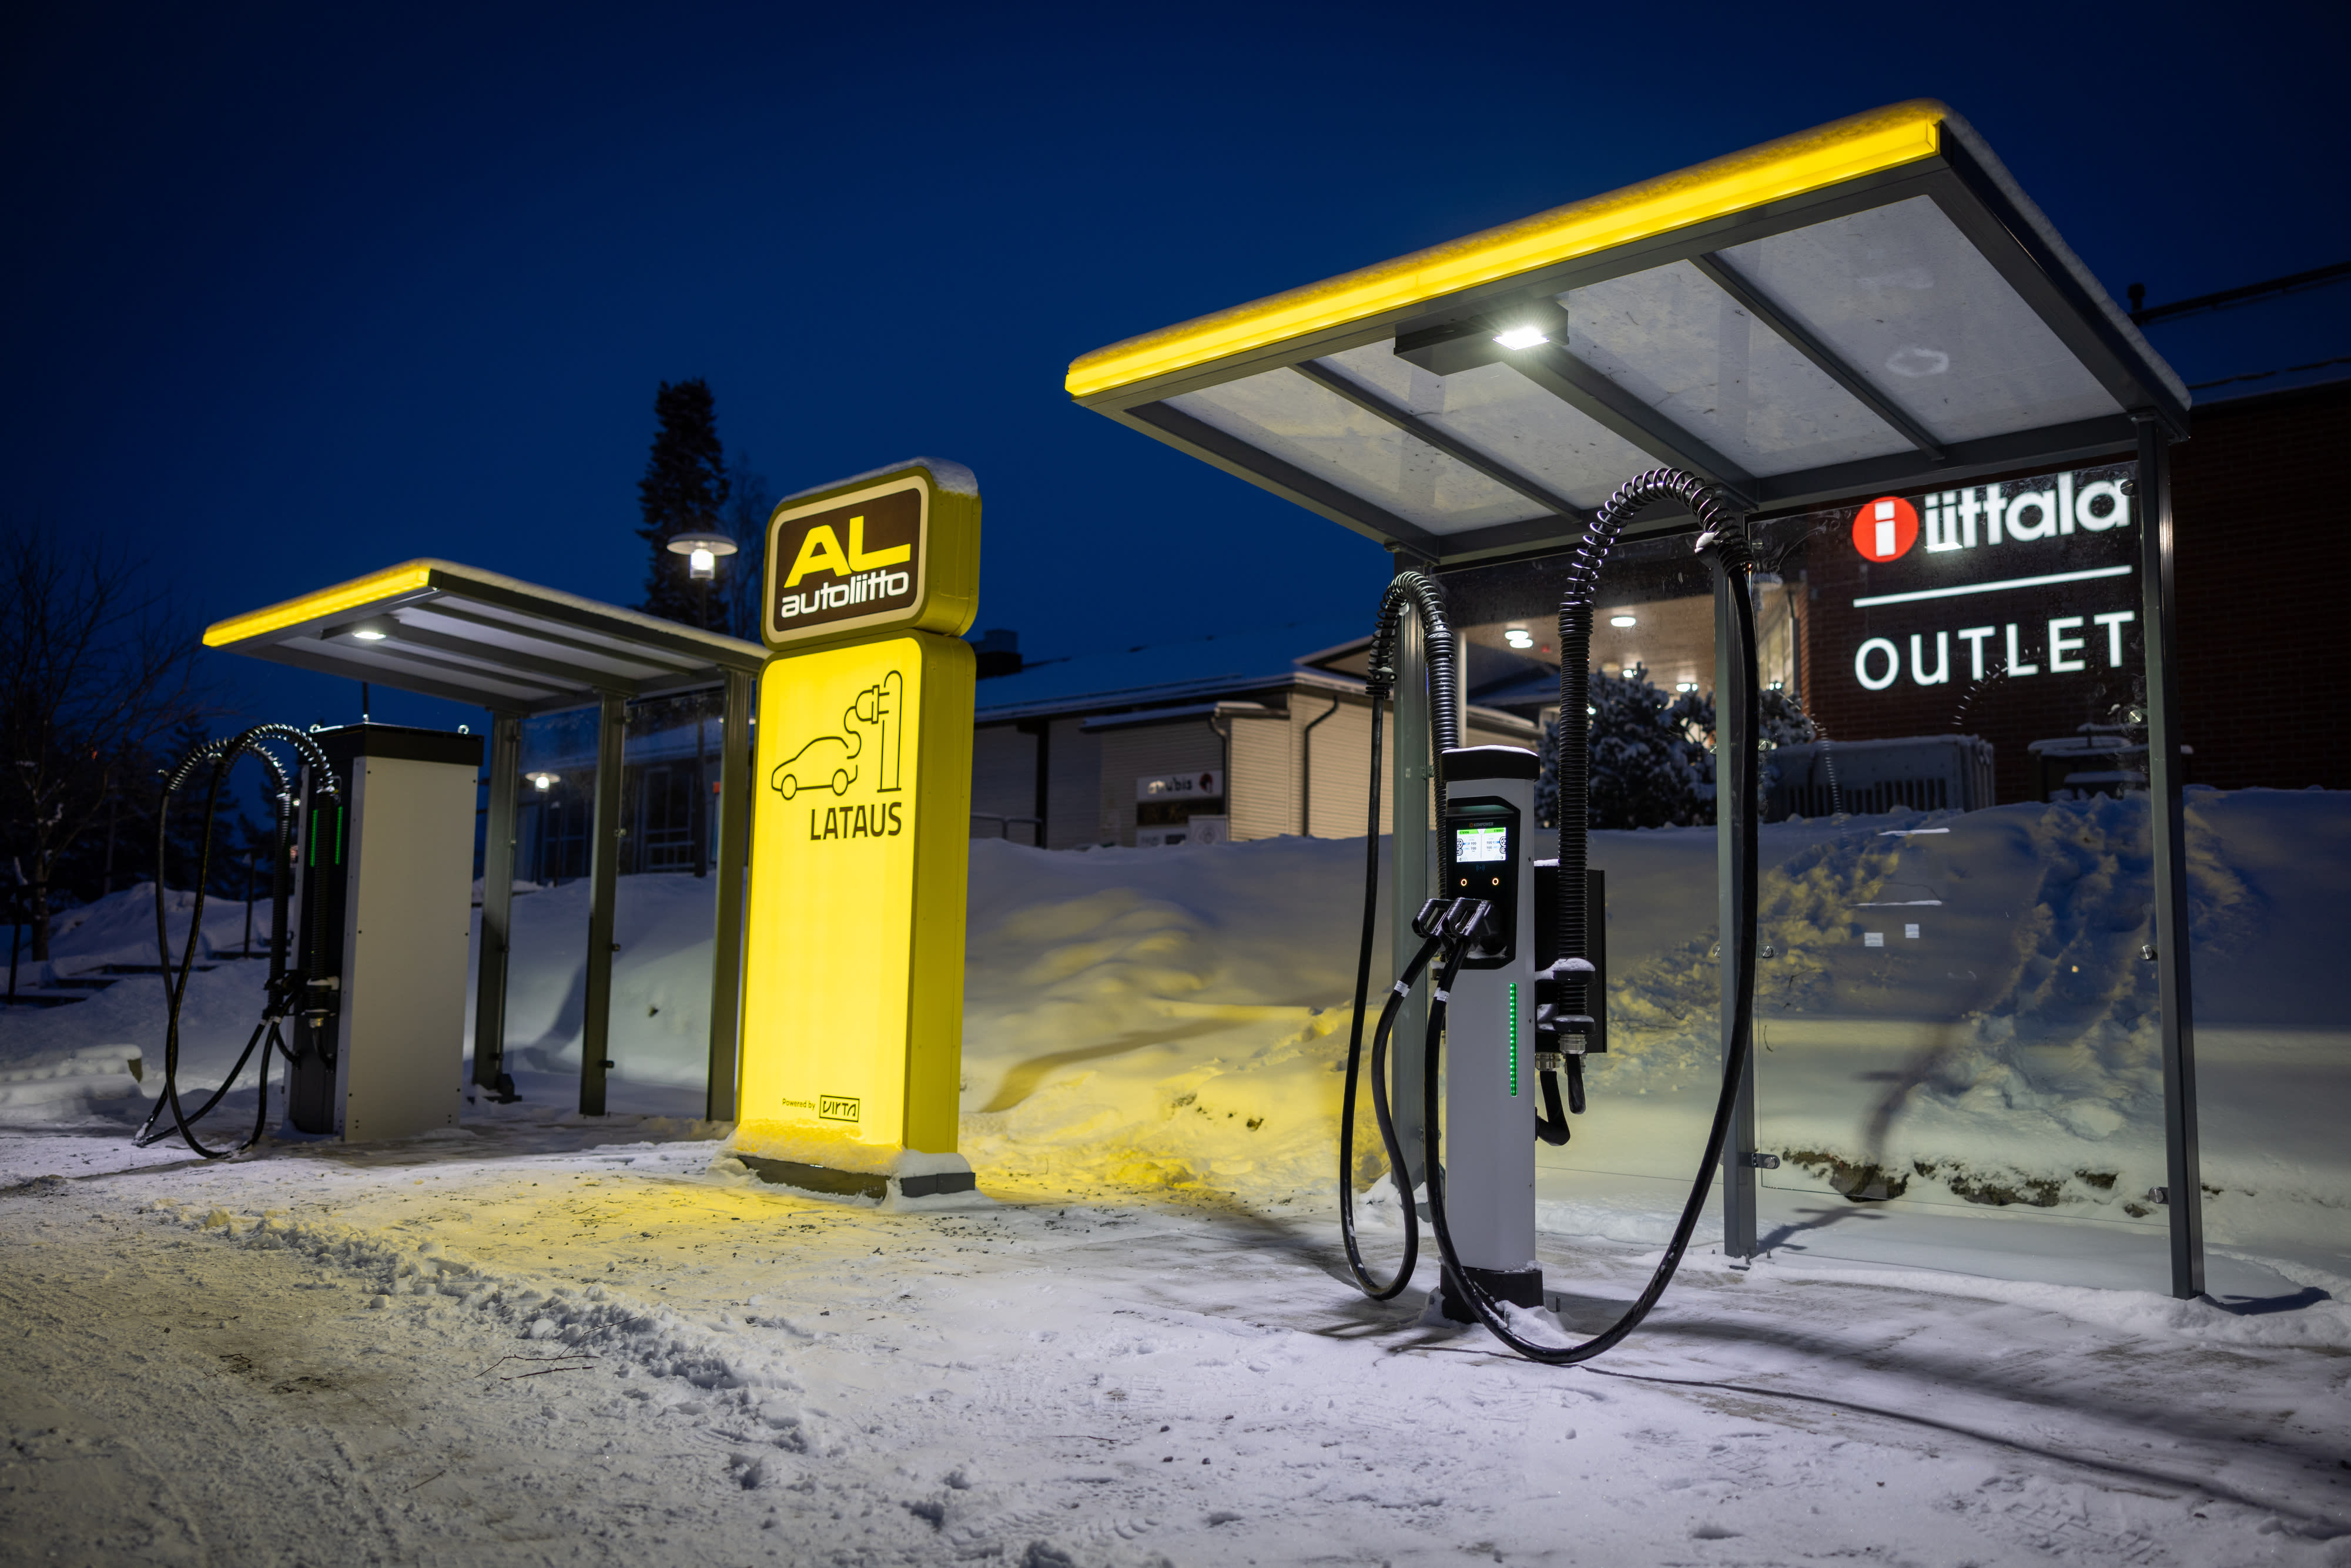 Autoilijaliitto is planning a network of charging points for electric cars around Finland